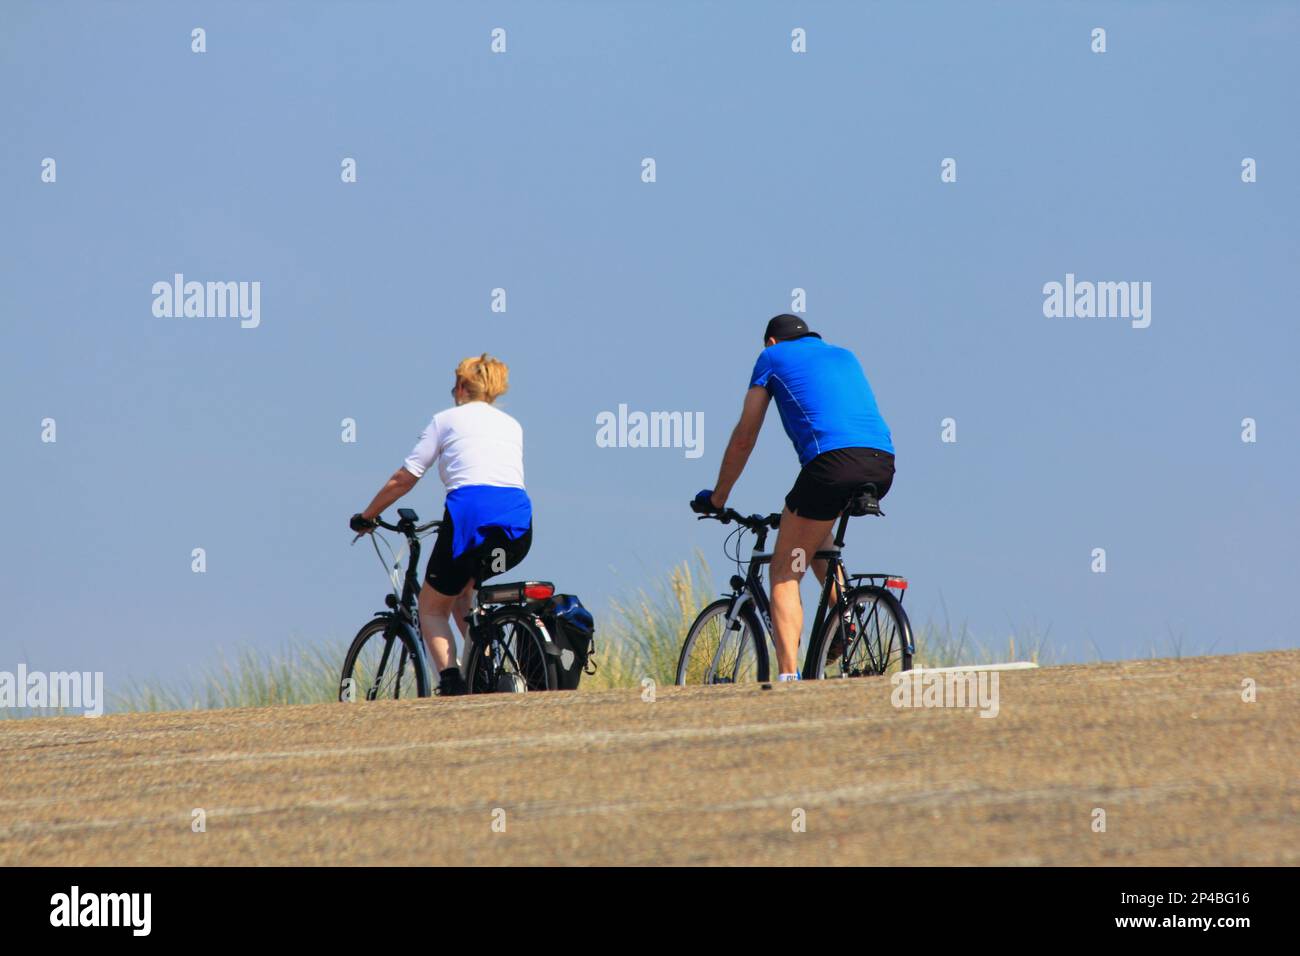 Brouwershaven, Netherlands August 22, 2015: Some cyclists at a ride in the nature Stock Photo